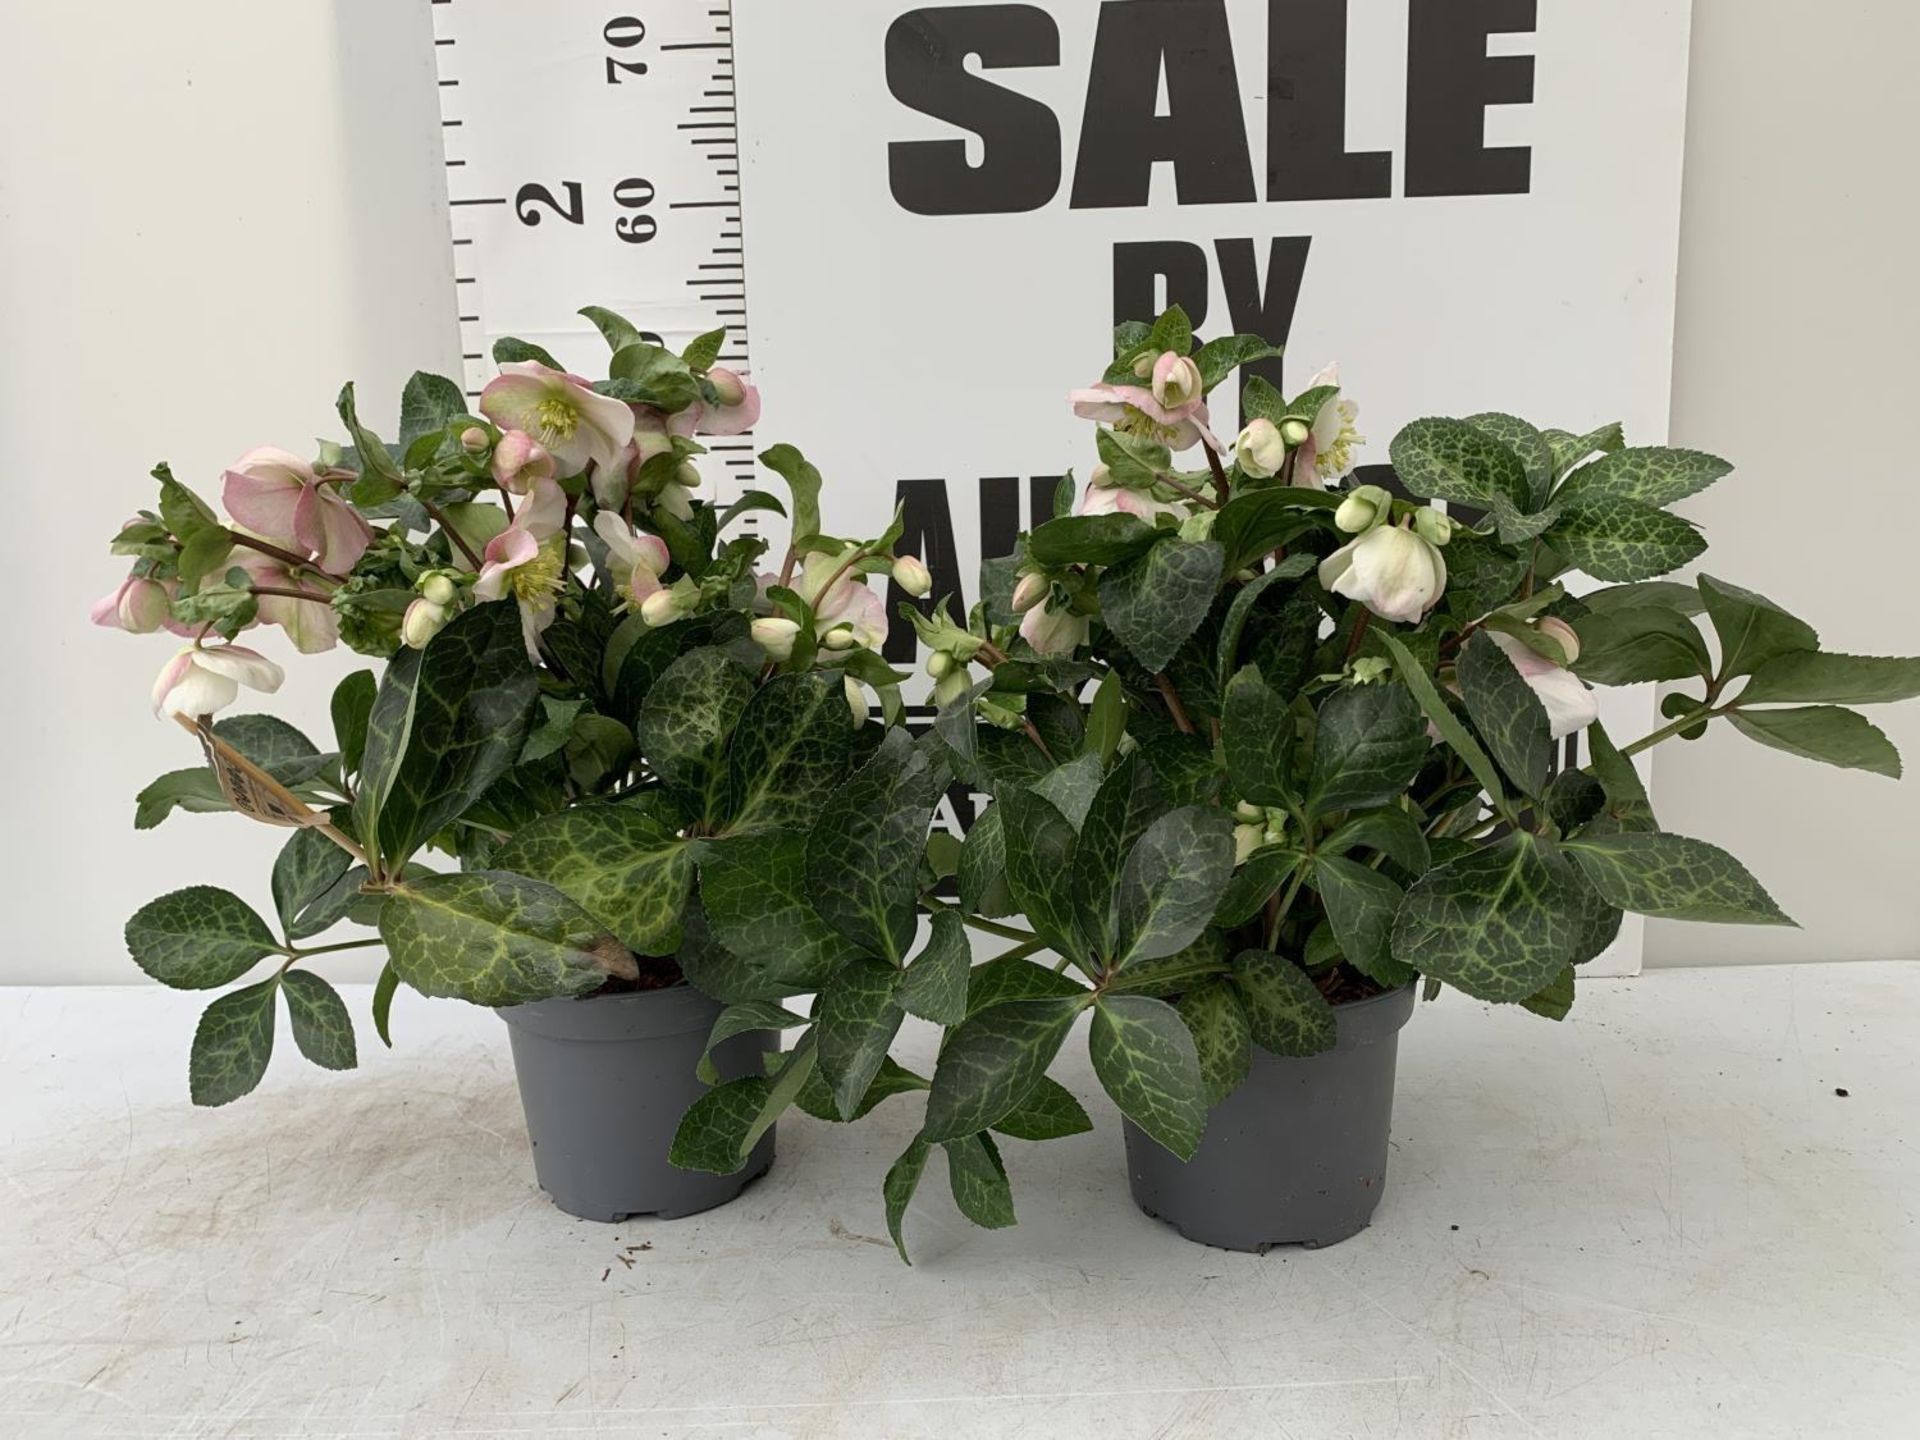 WELCOME TO ASHLEY WALLER HORTICULTURE AUCTION - LOTS ARE BEING ADDED DAILY - THE IMAGES SHOW LOTS - Image 35 of 40